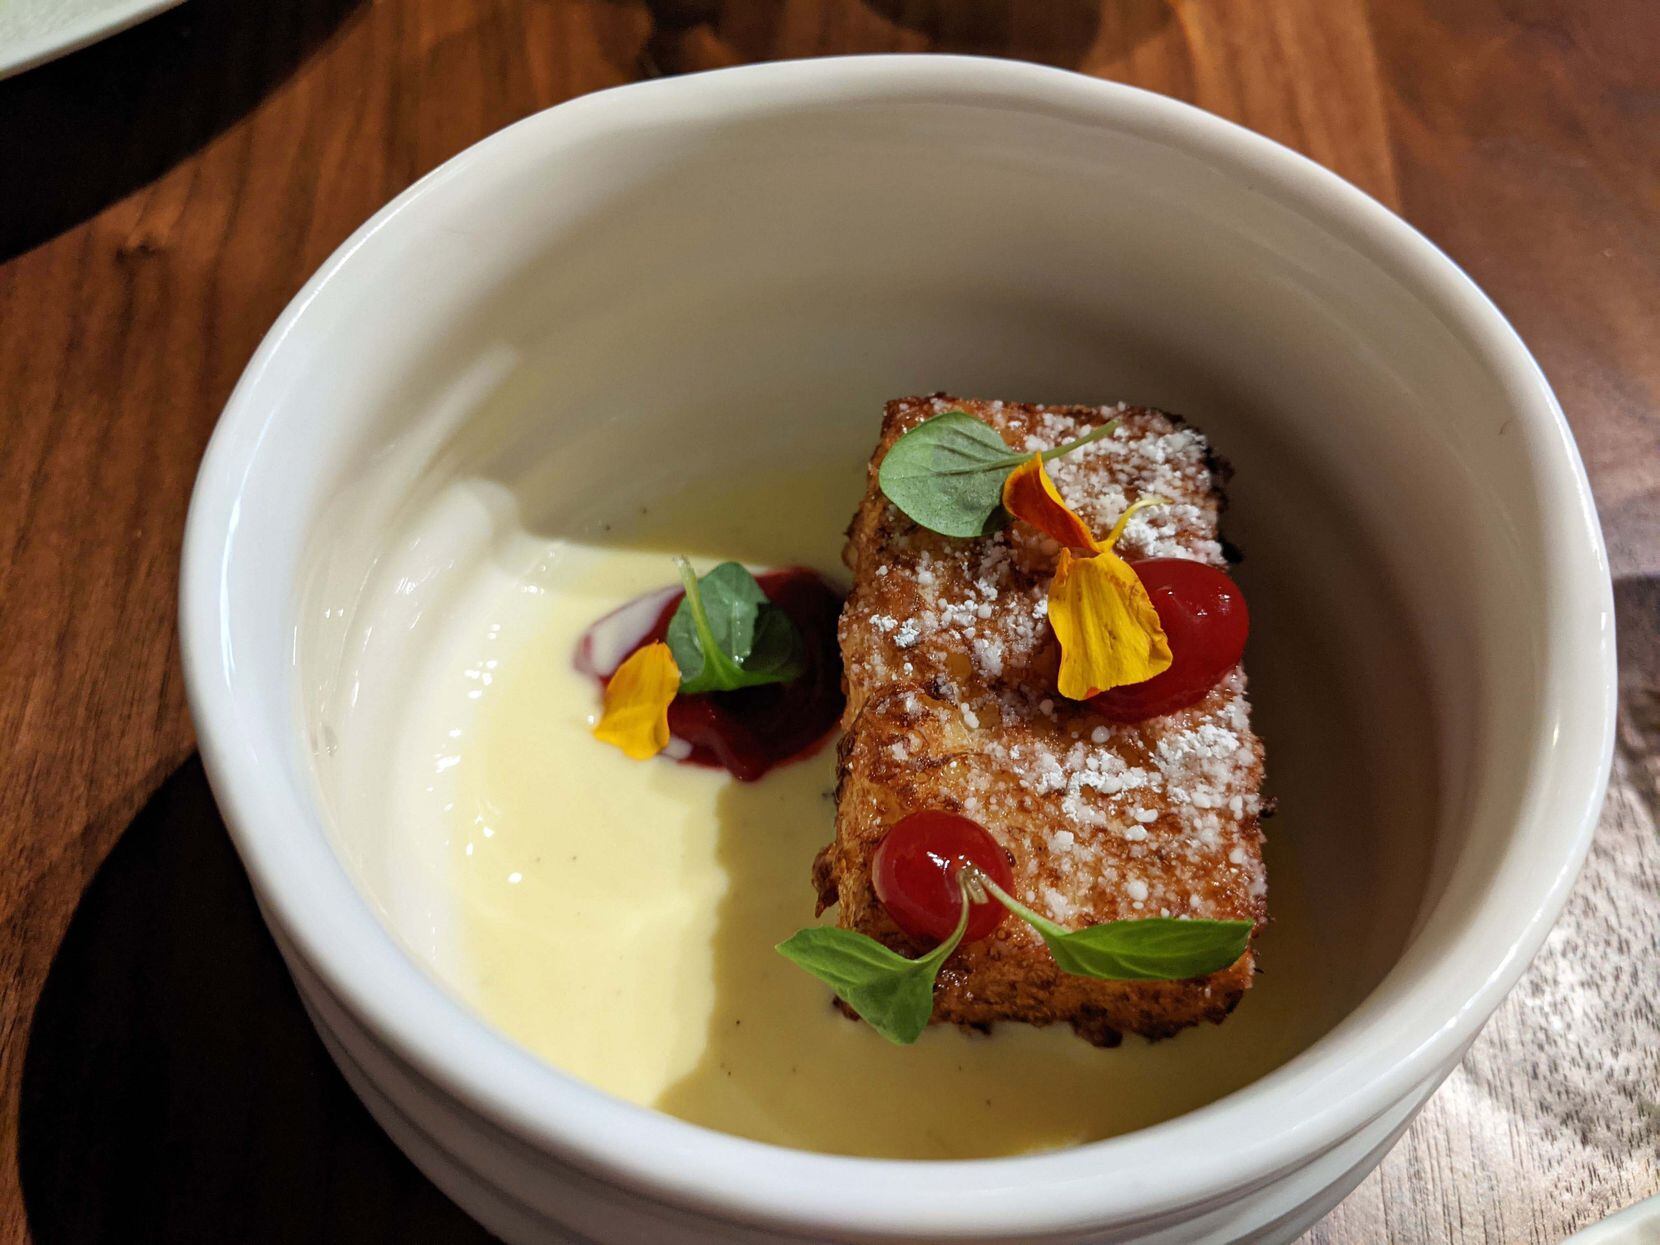 Carte Blanche's passionfruit pain perdu, which our columnist thought tasted like funnel cake.